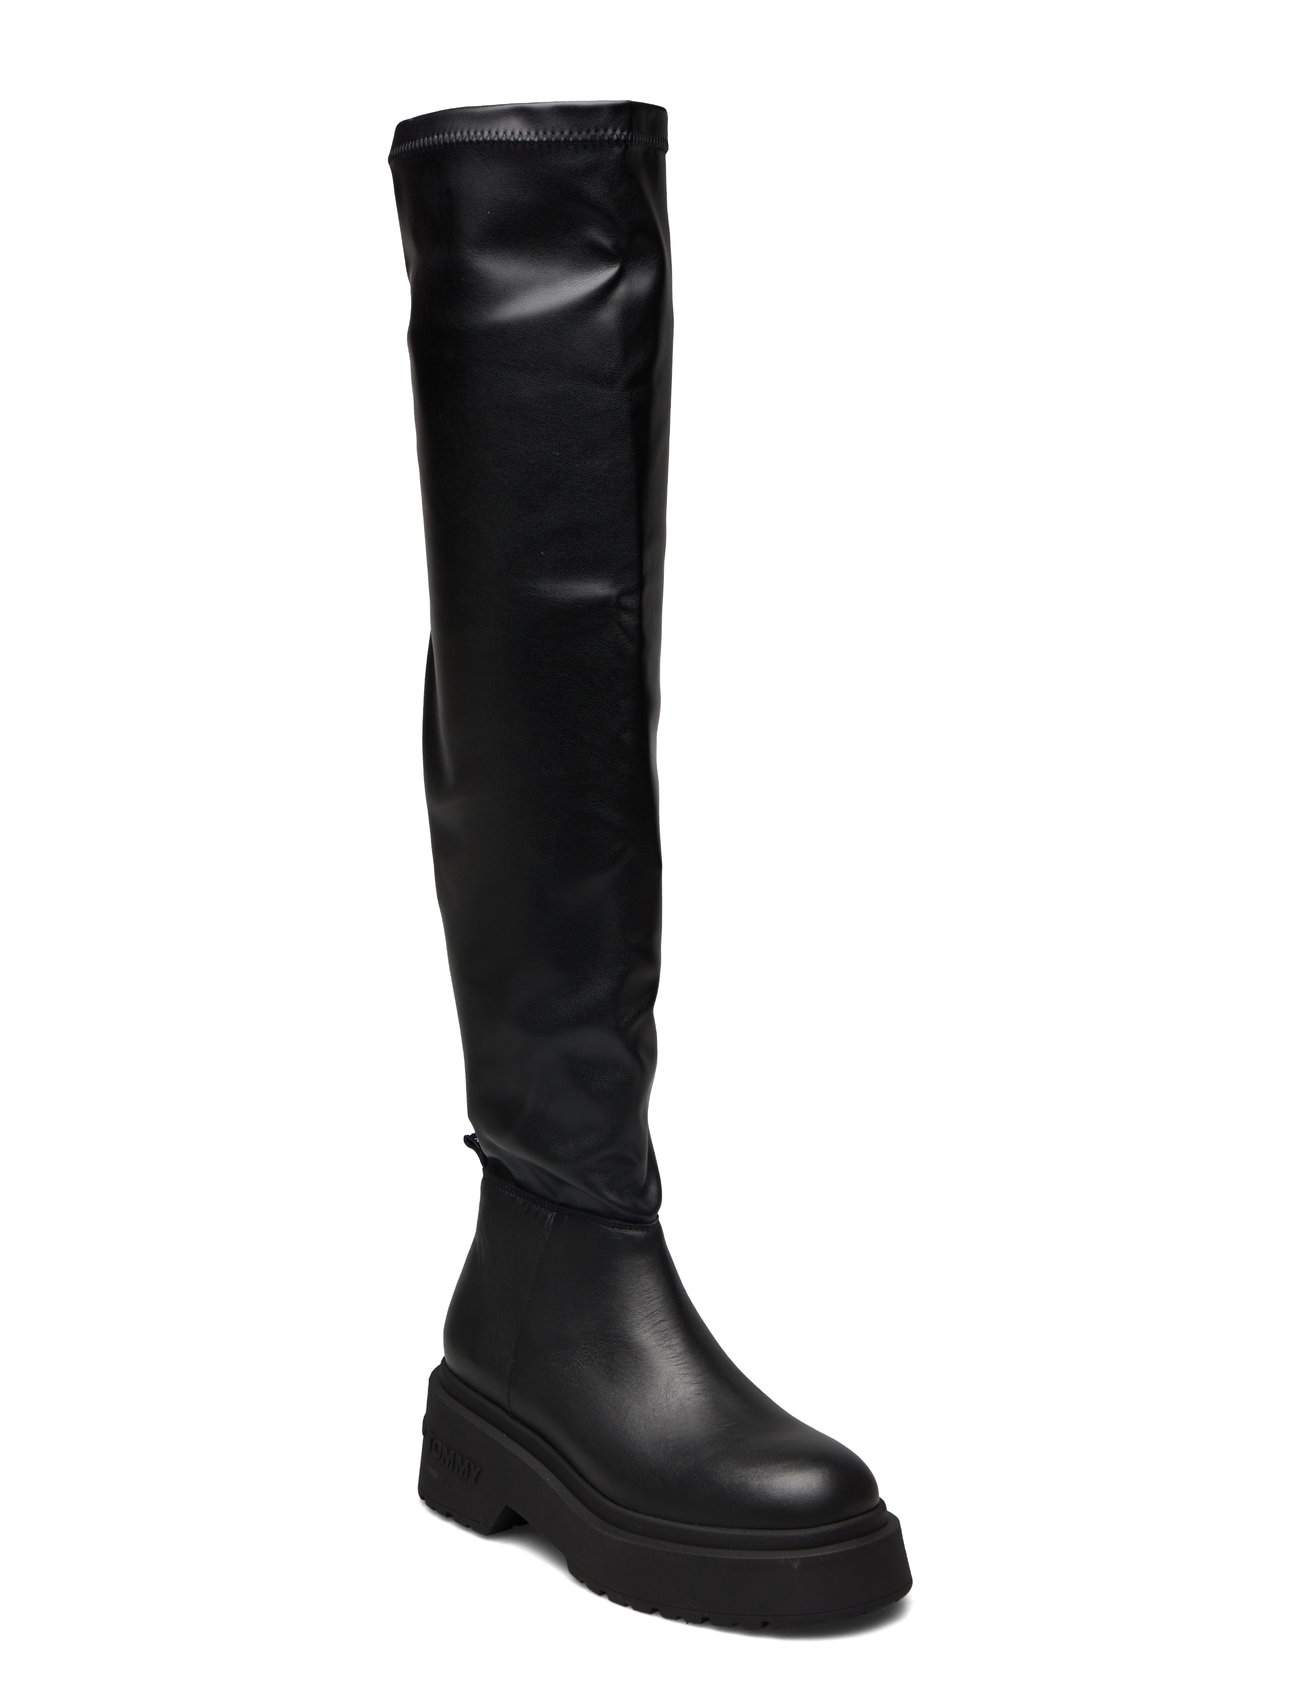 Tjw Over The Knee Boots Shoes Boots Over-the-knee Black Tommy Hilfiger